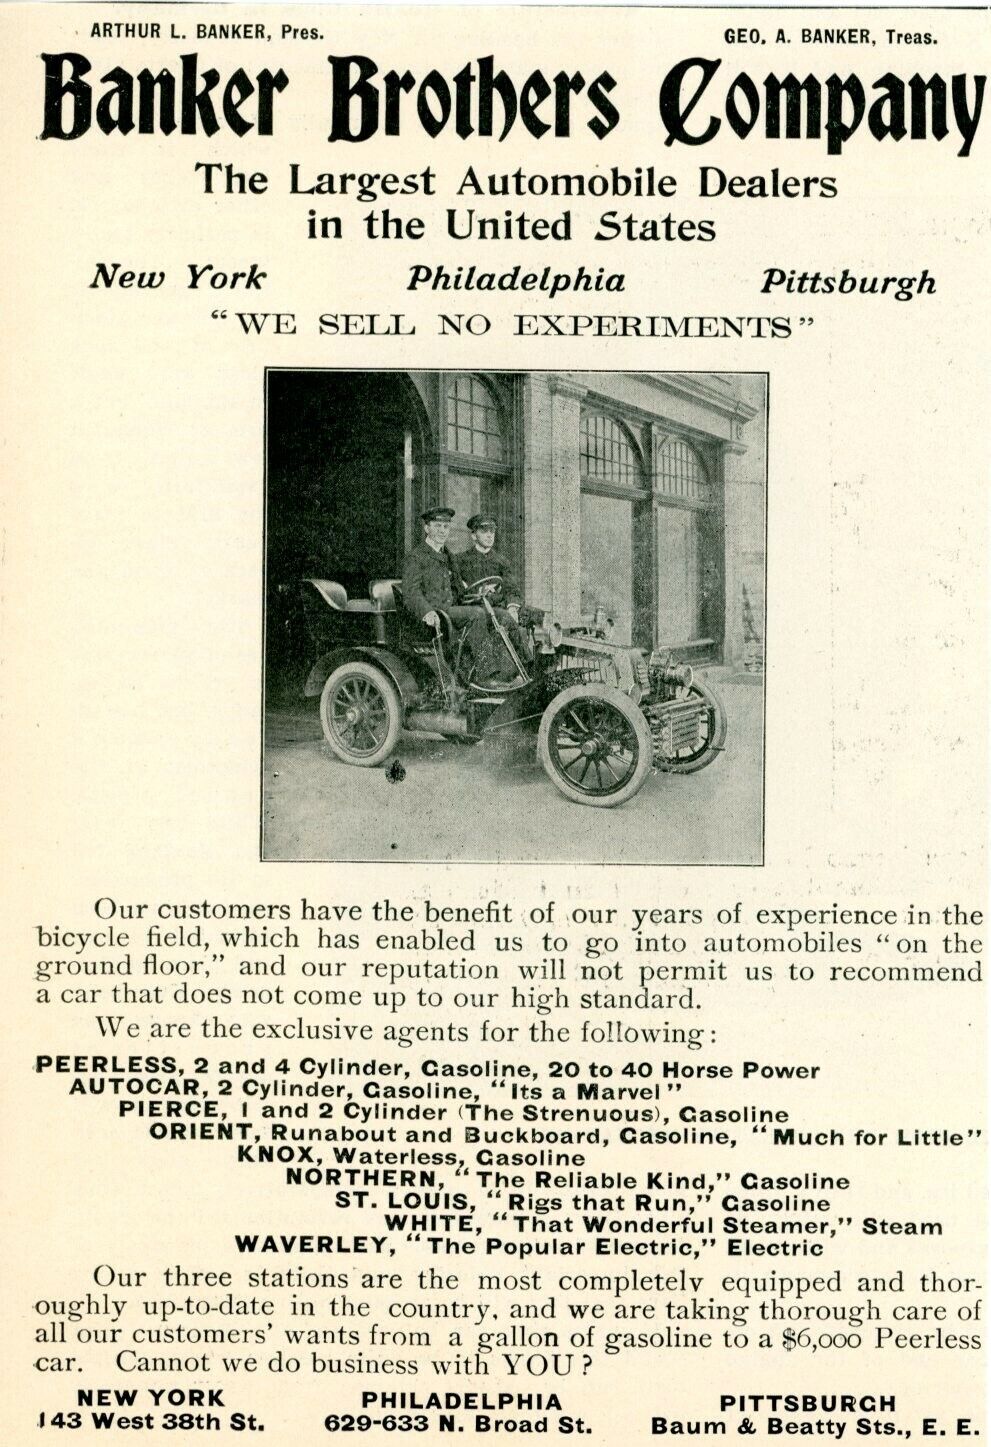 1903 Original Banker Brothers Car Dealers Ad. 9 Makes. 3 Cities. Largest In USA